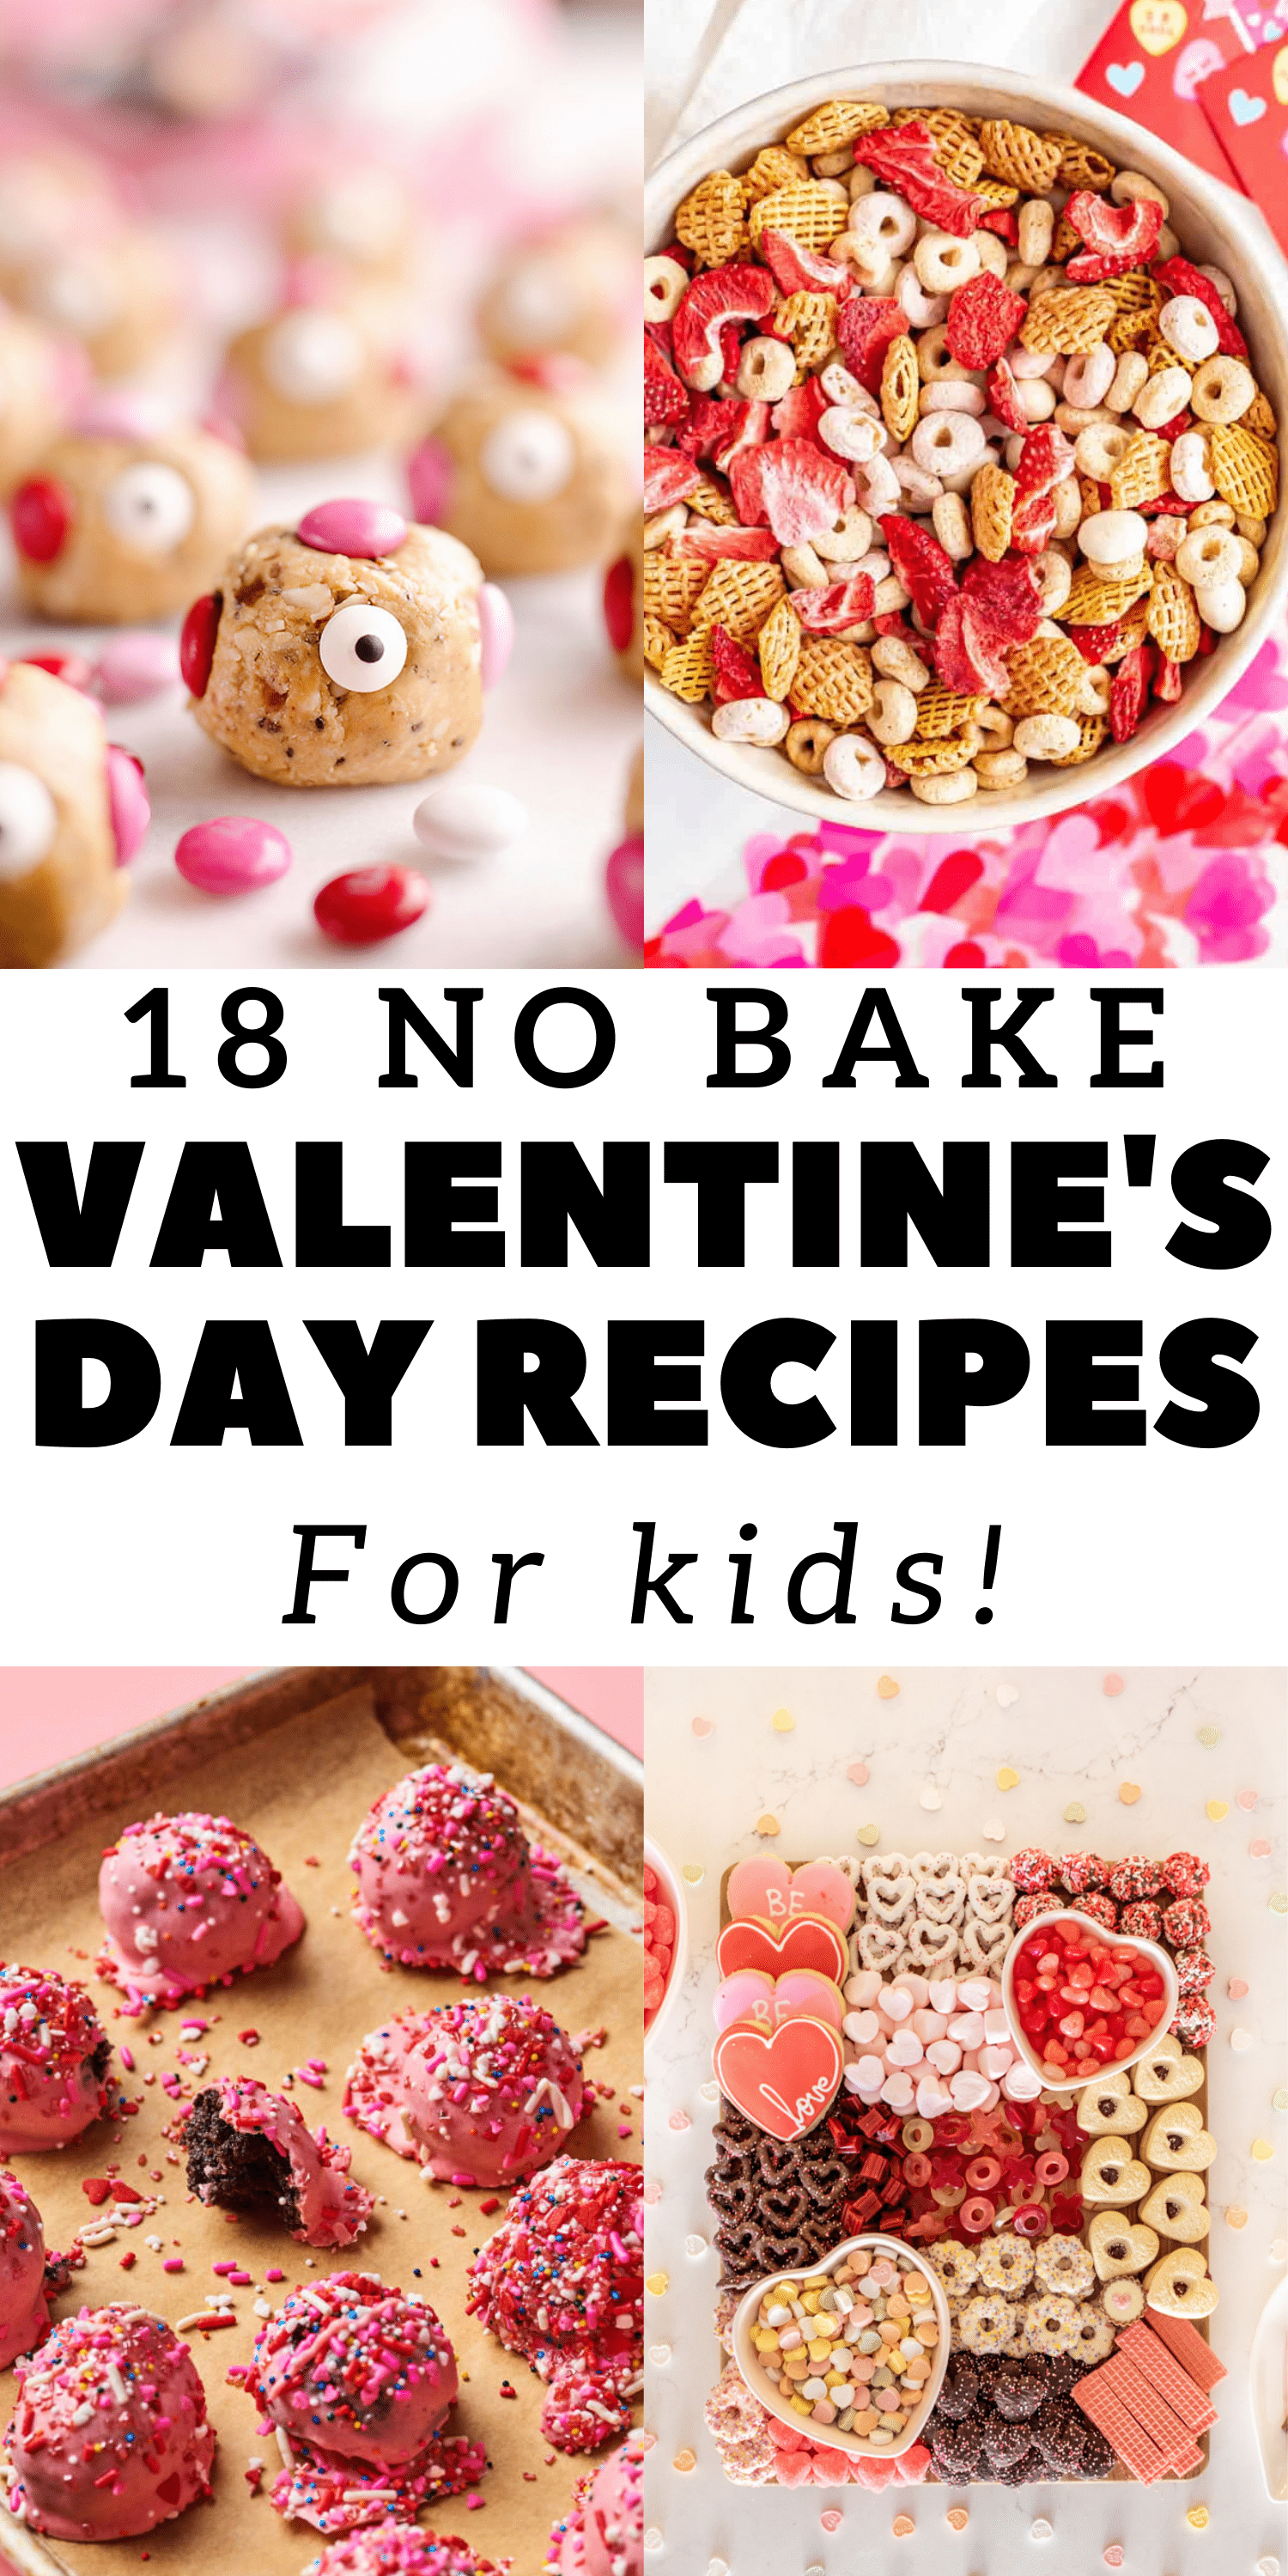 18 No Bake Valentine's Day Recipes for kids Lifestyle of a Foodie